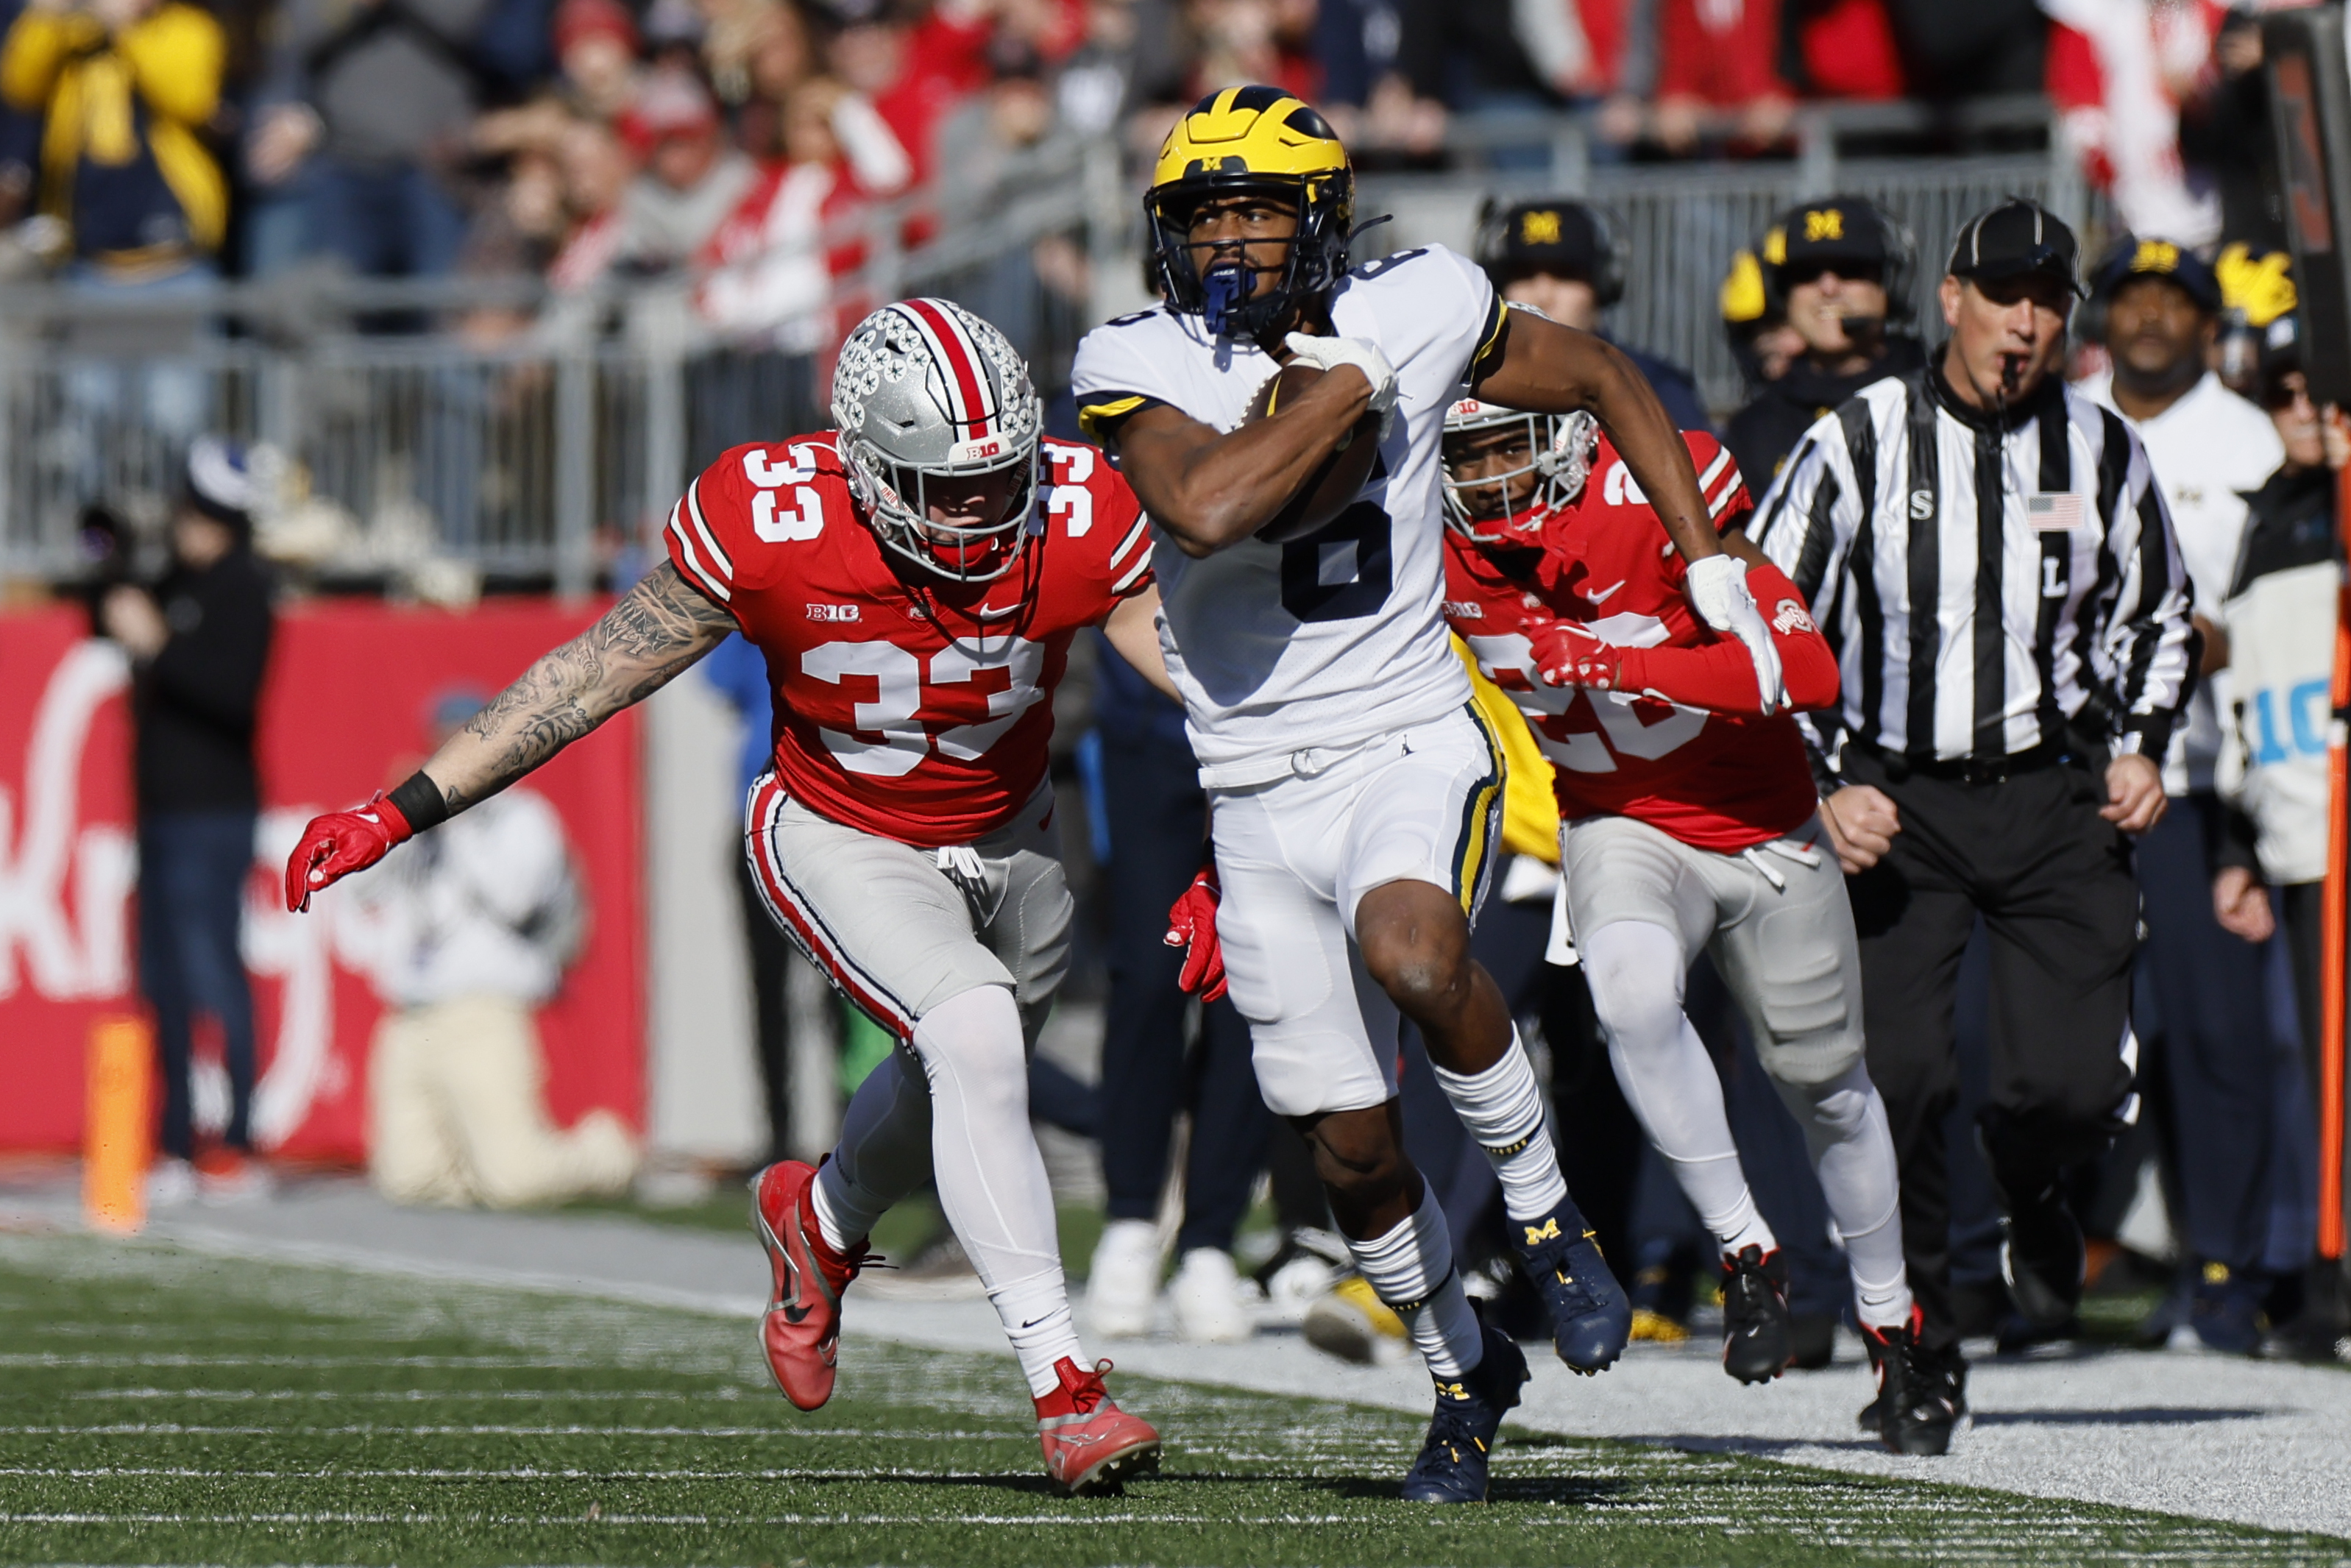 Michigan to Hit the Road for Rivalry Game at Ohio State